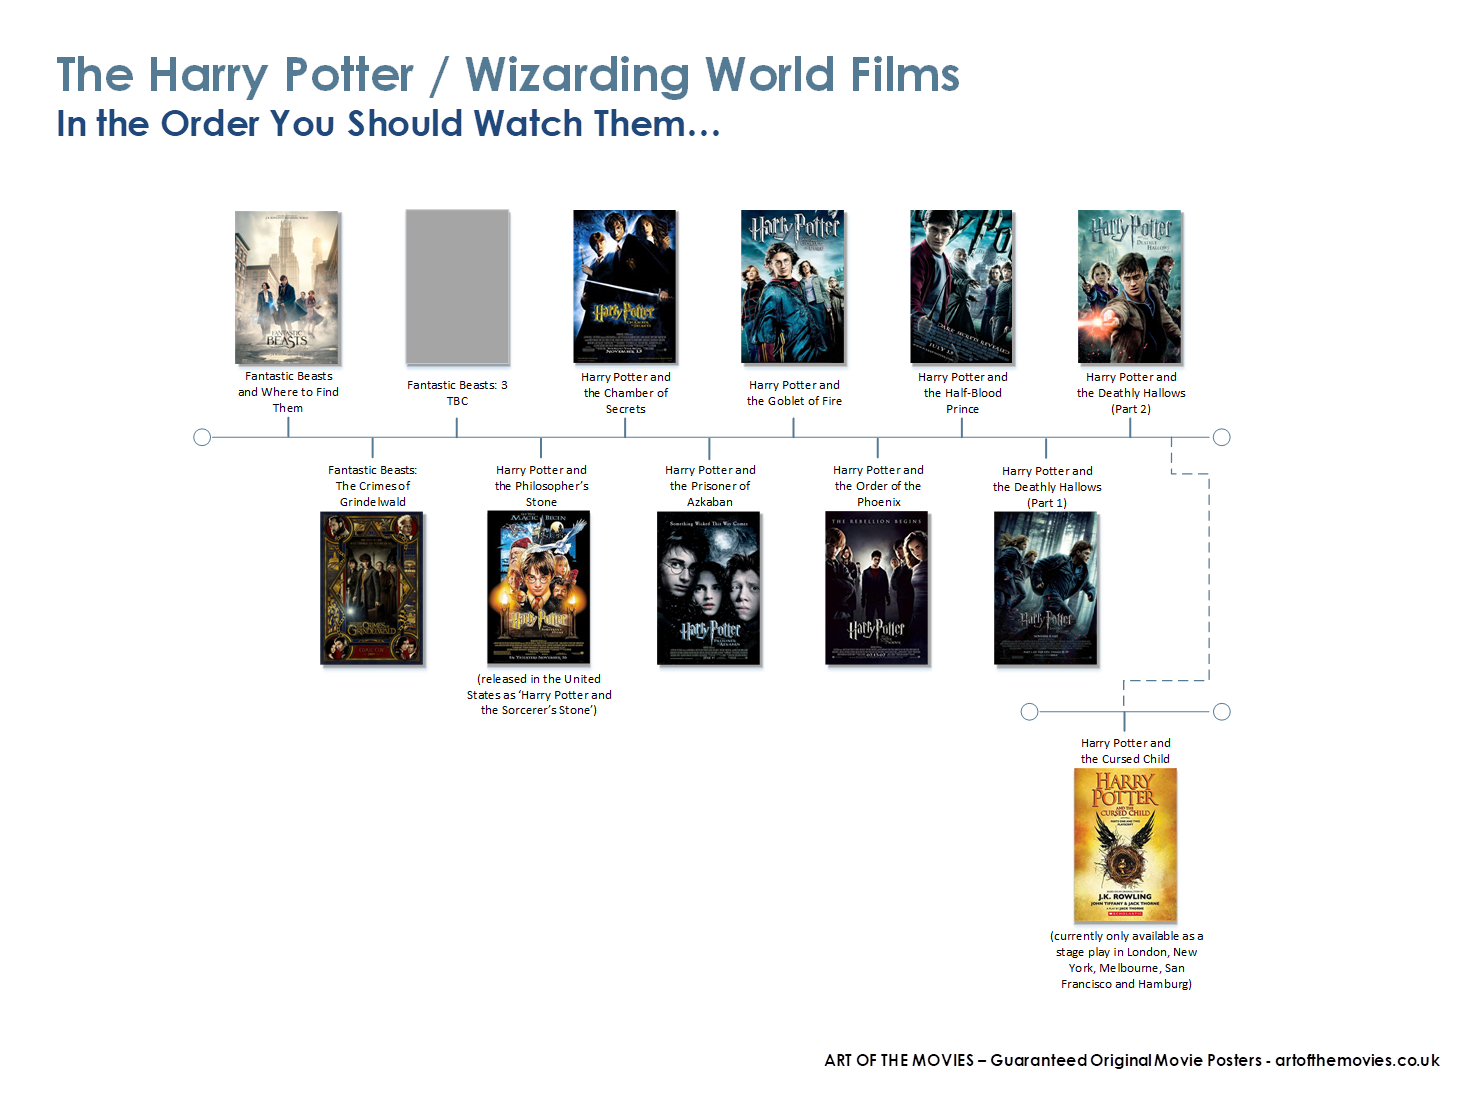 Harry Potter': How to Watch All the Movies in Order